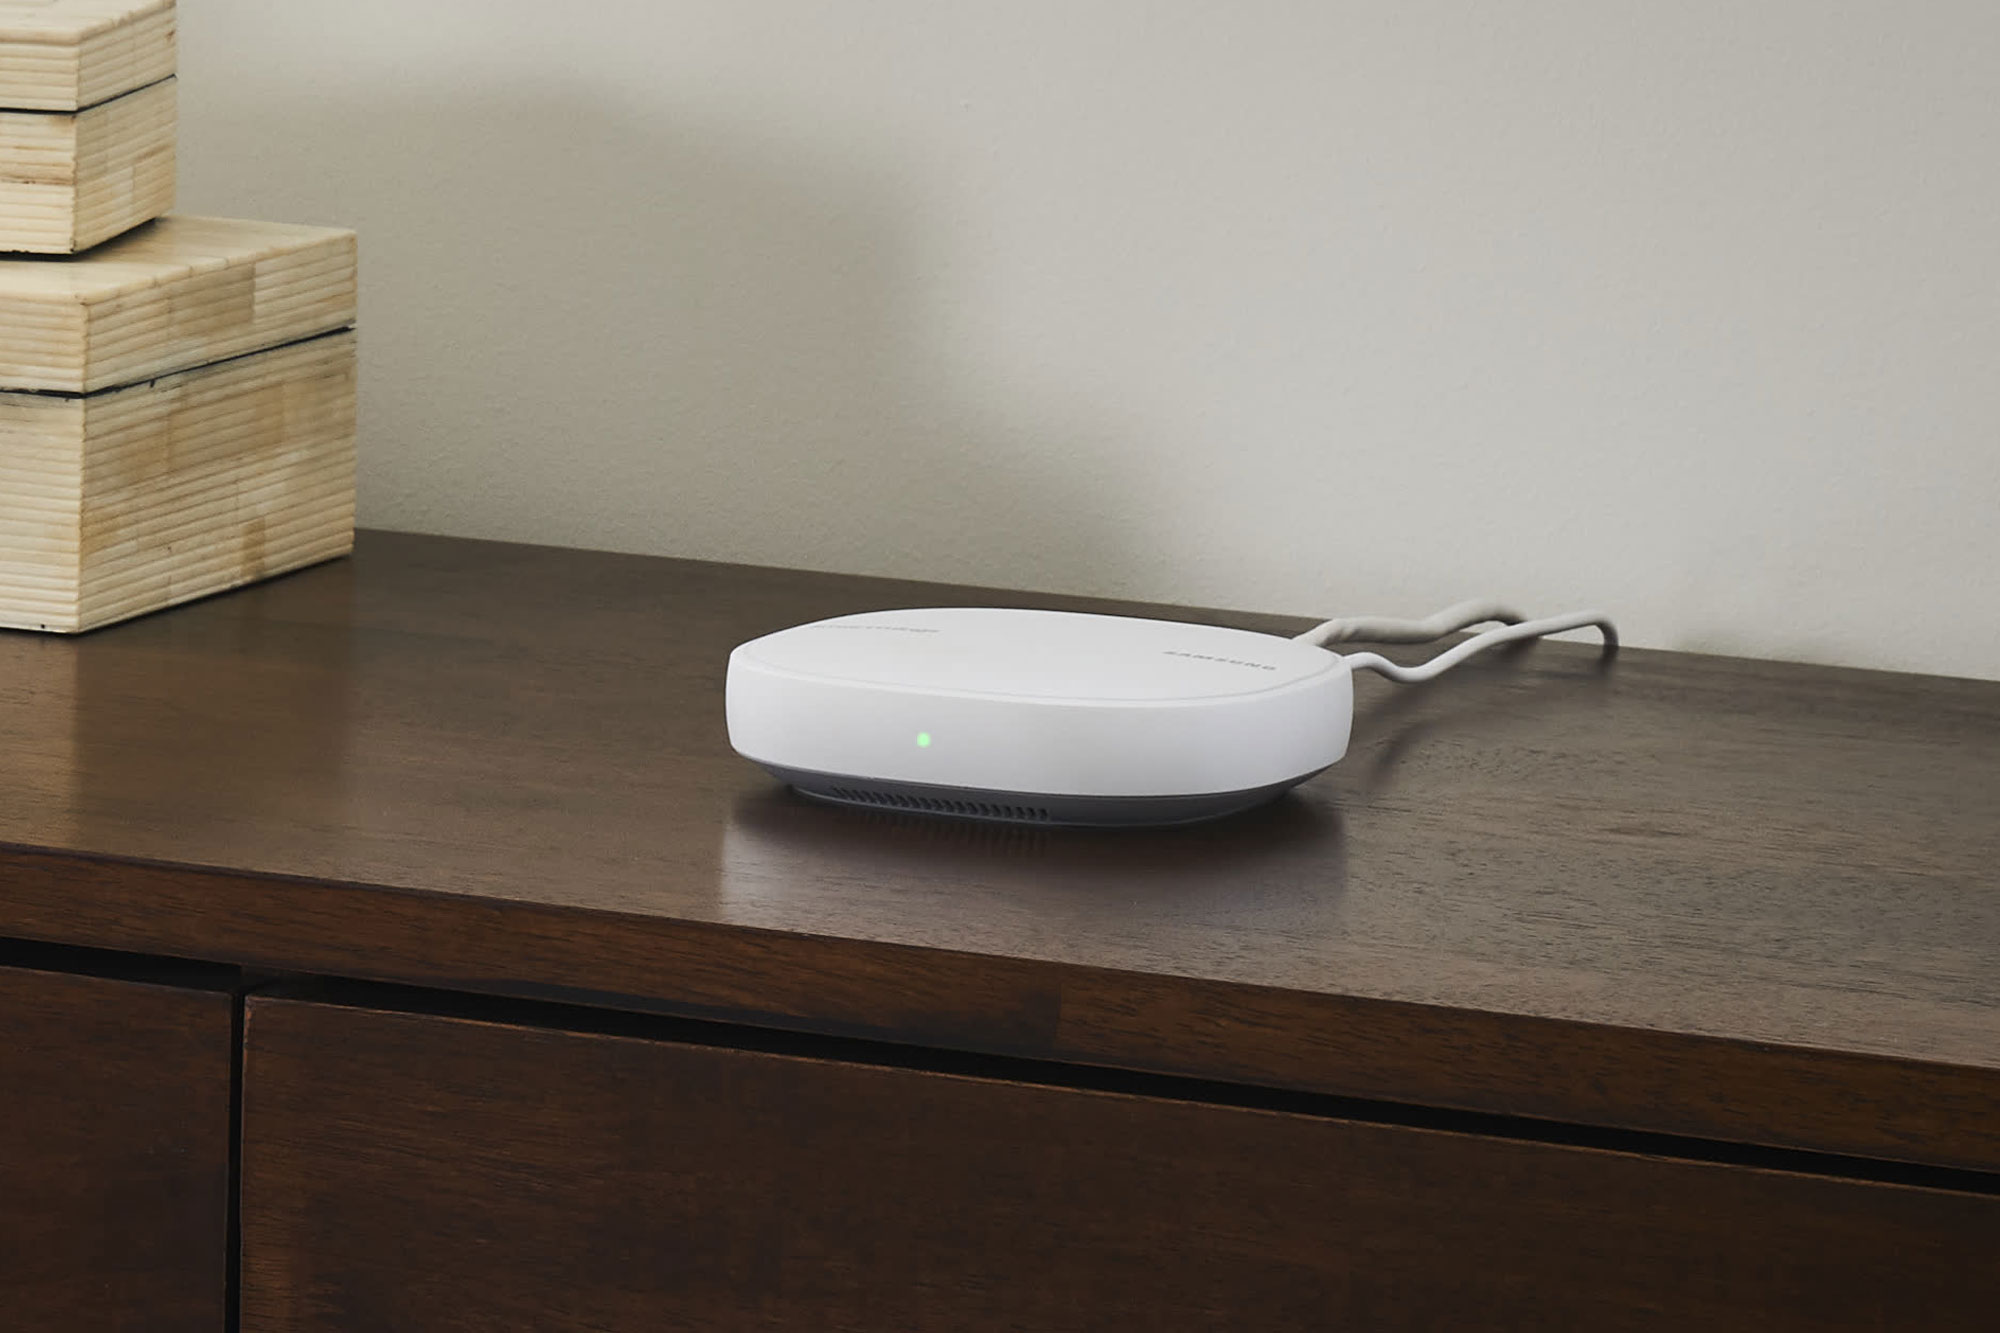 Powered by Plume, SmartThings Wifi learns your environment and optimizes performance for a powerful, reliable home Wi-Fi experience.